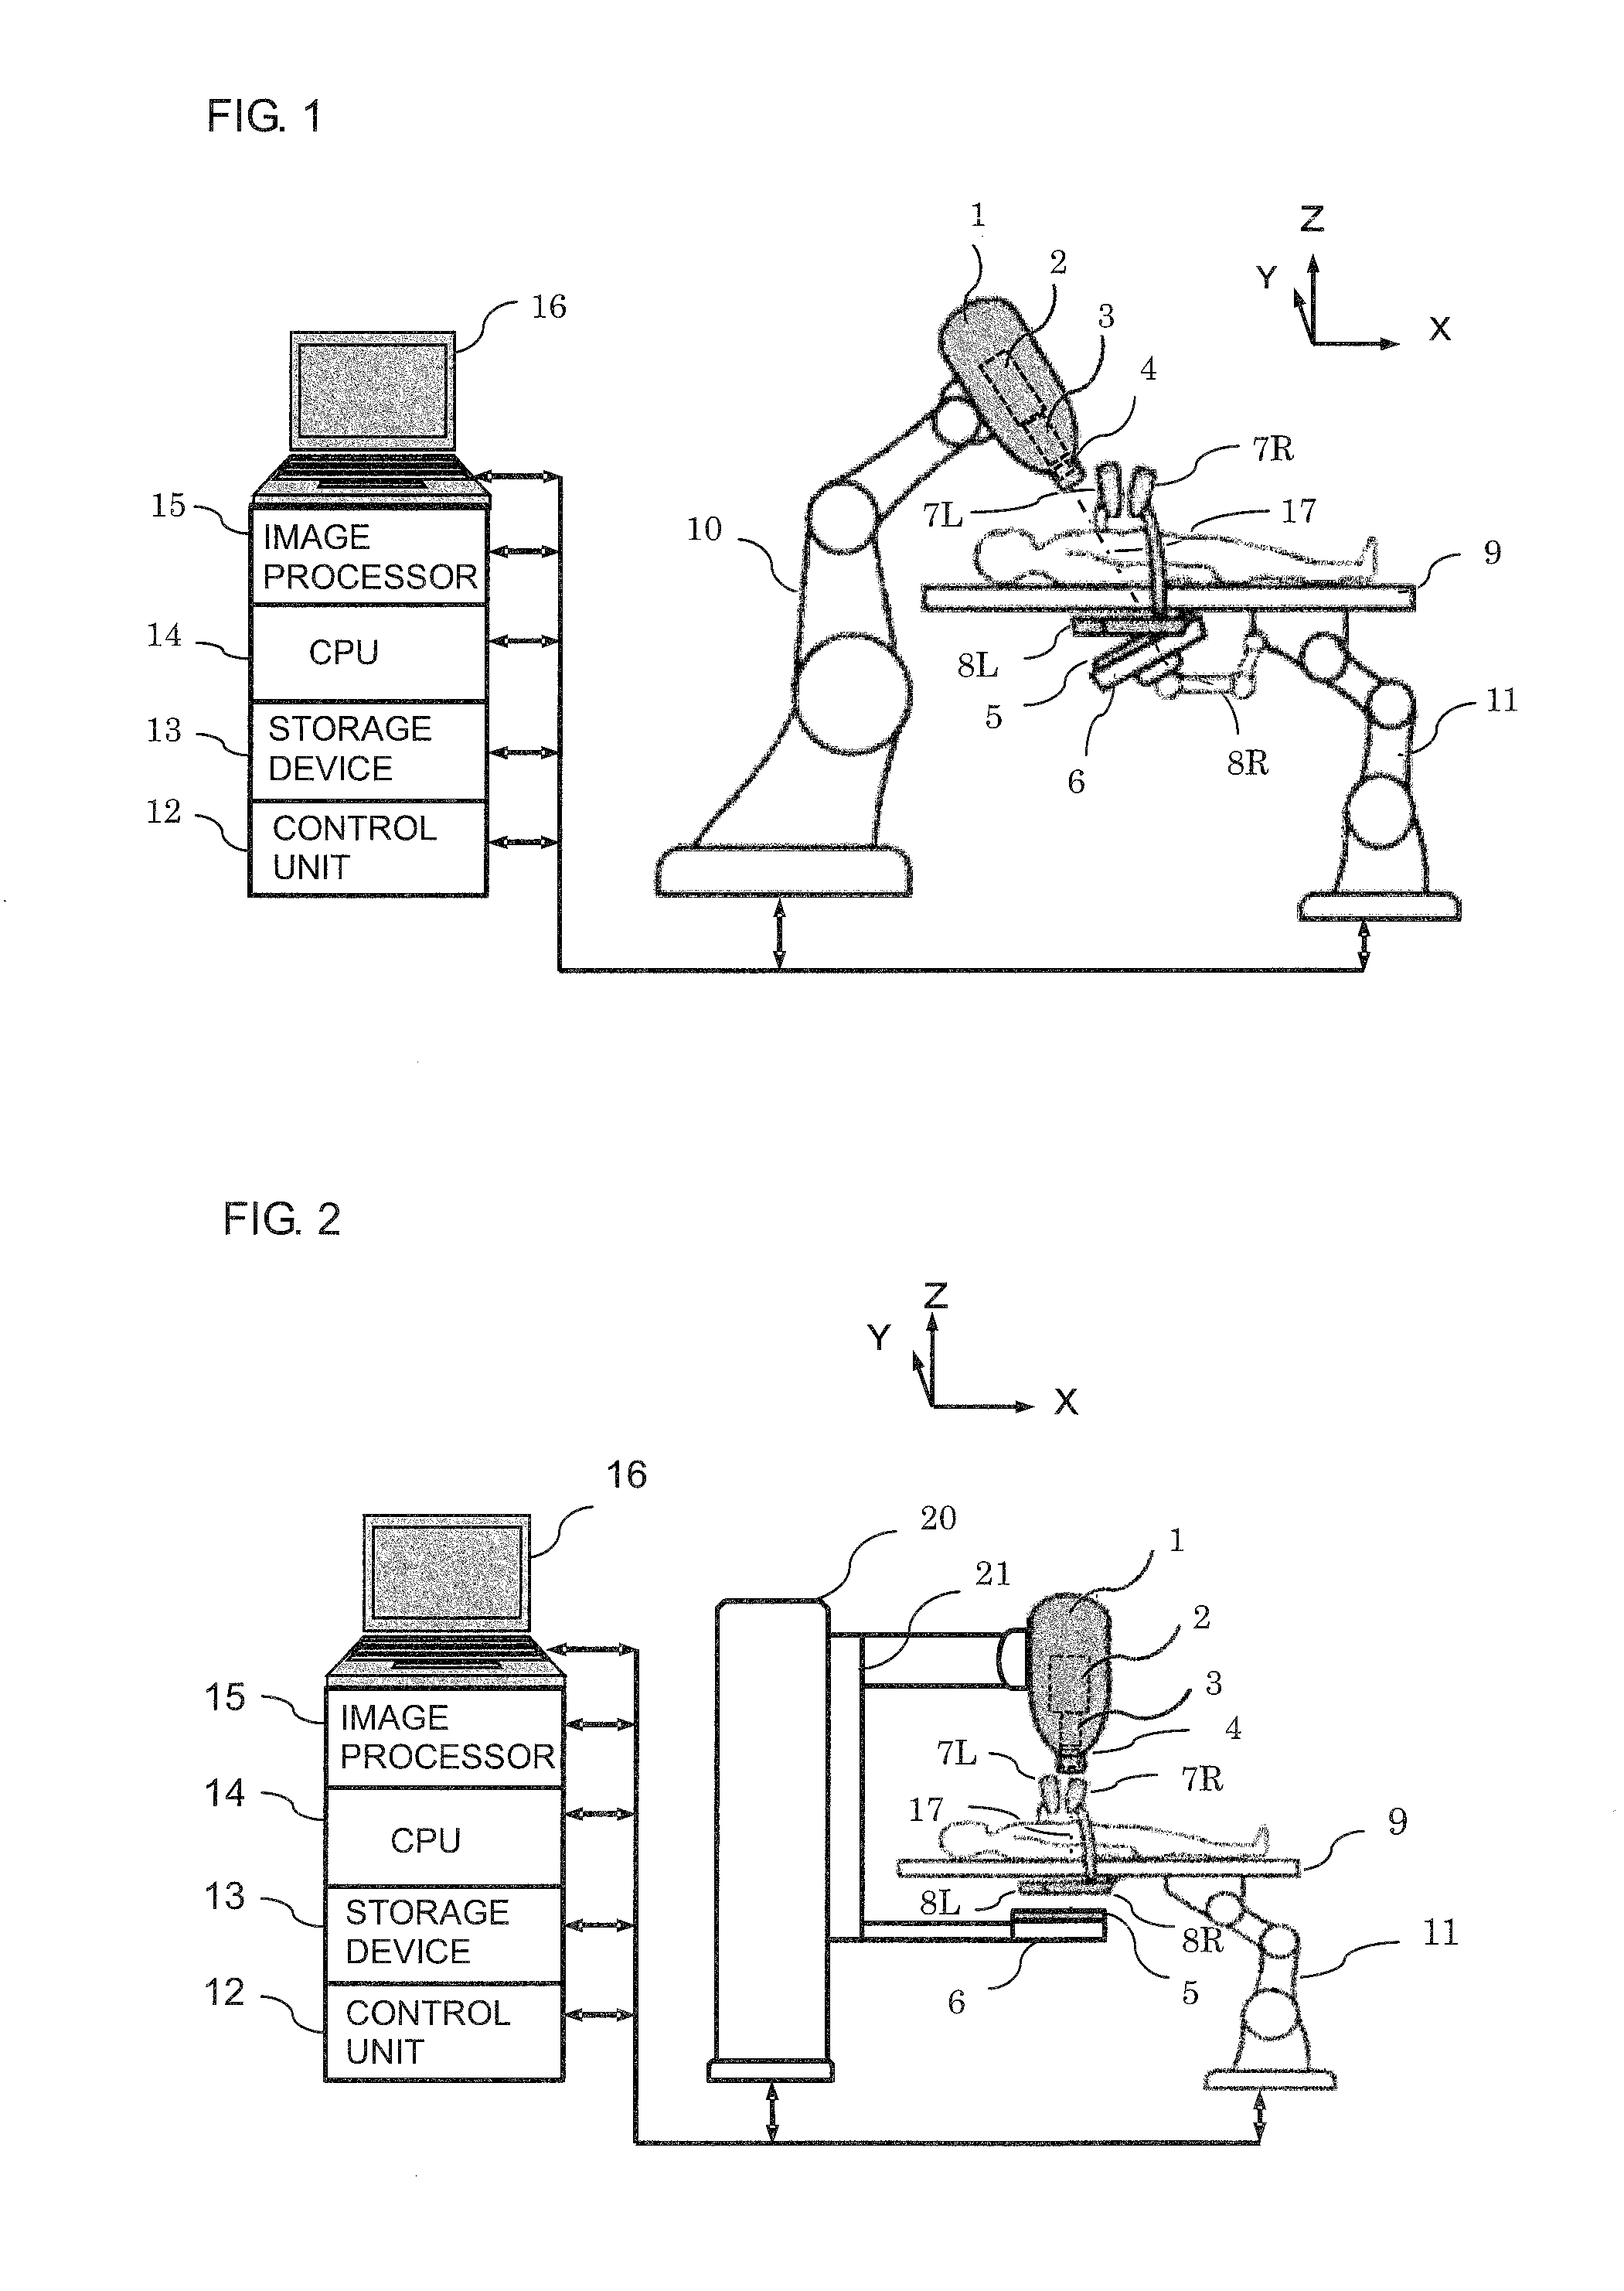 Real-time three-dimensional radiation therapy apparatus and method